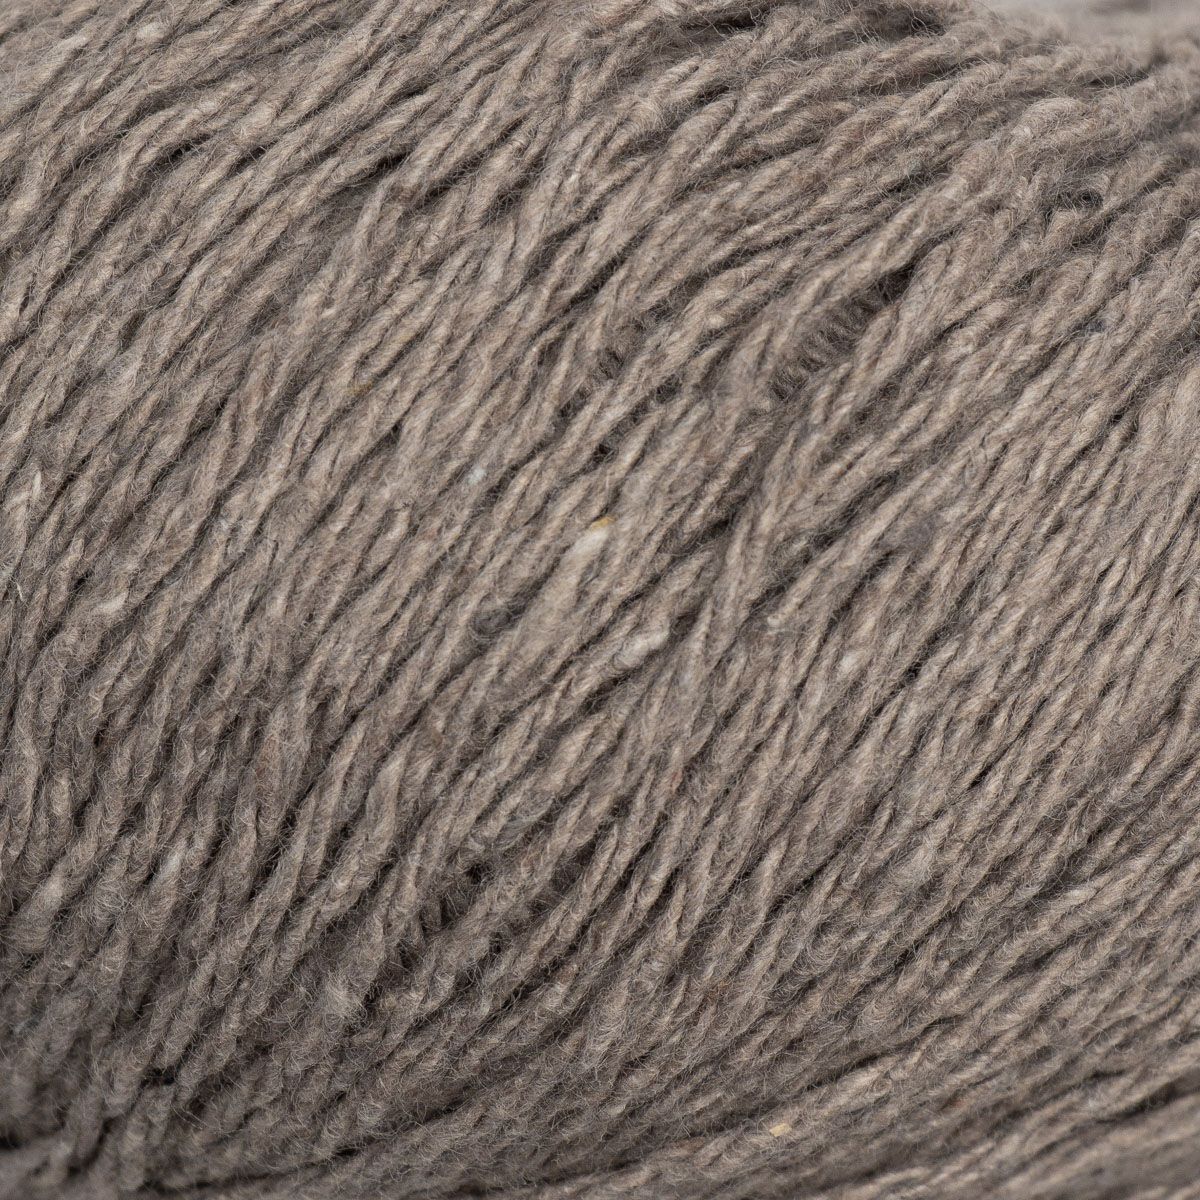 Recycled Denim Yarn - Taupe (3ply)